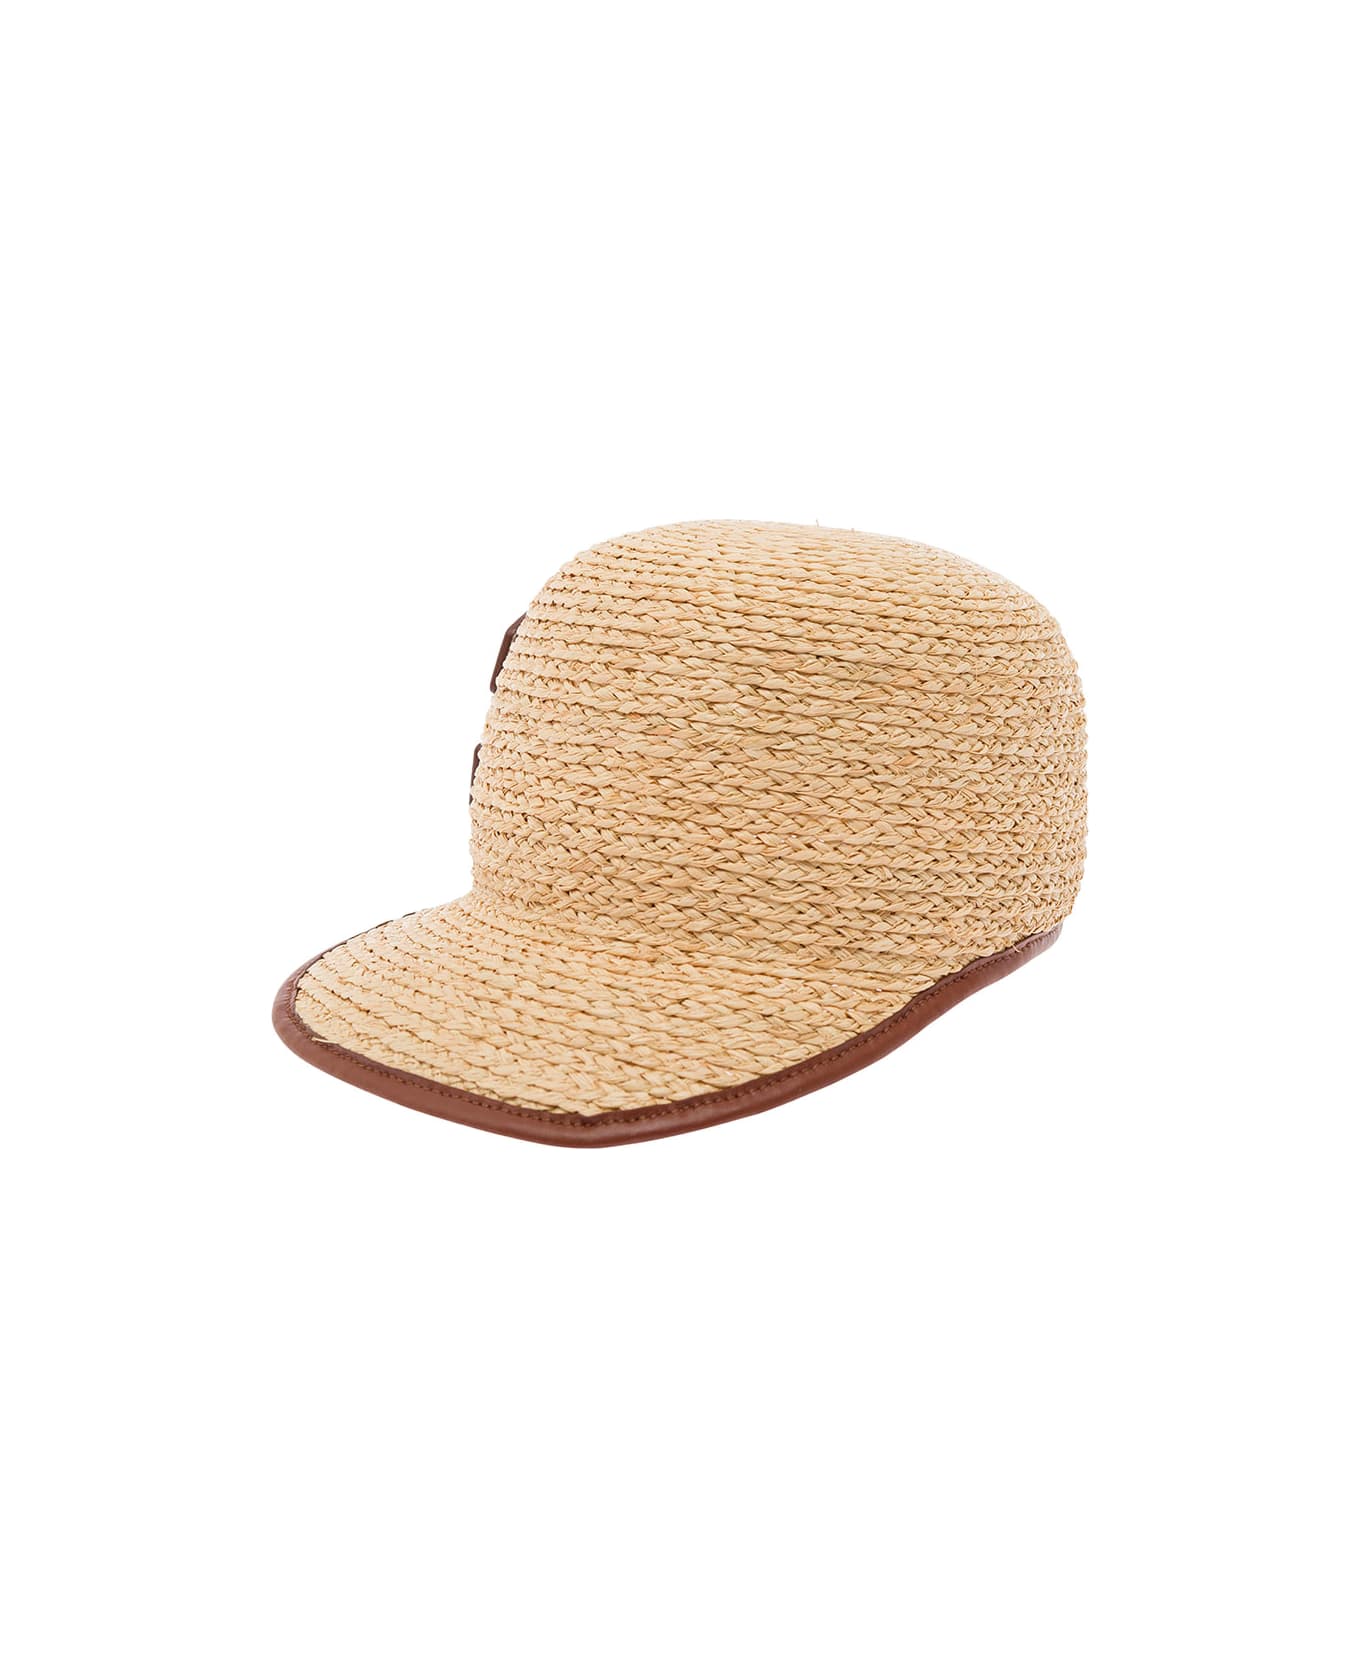 Casadei Beige Baseball Cap With Logo Detail In Leather And Rafia Woman - Beige